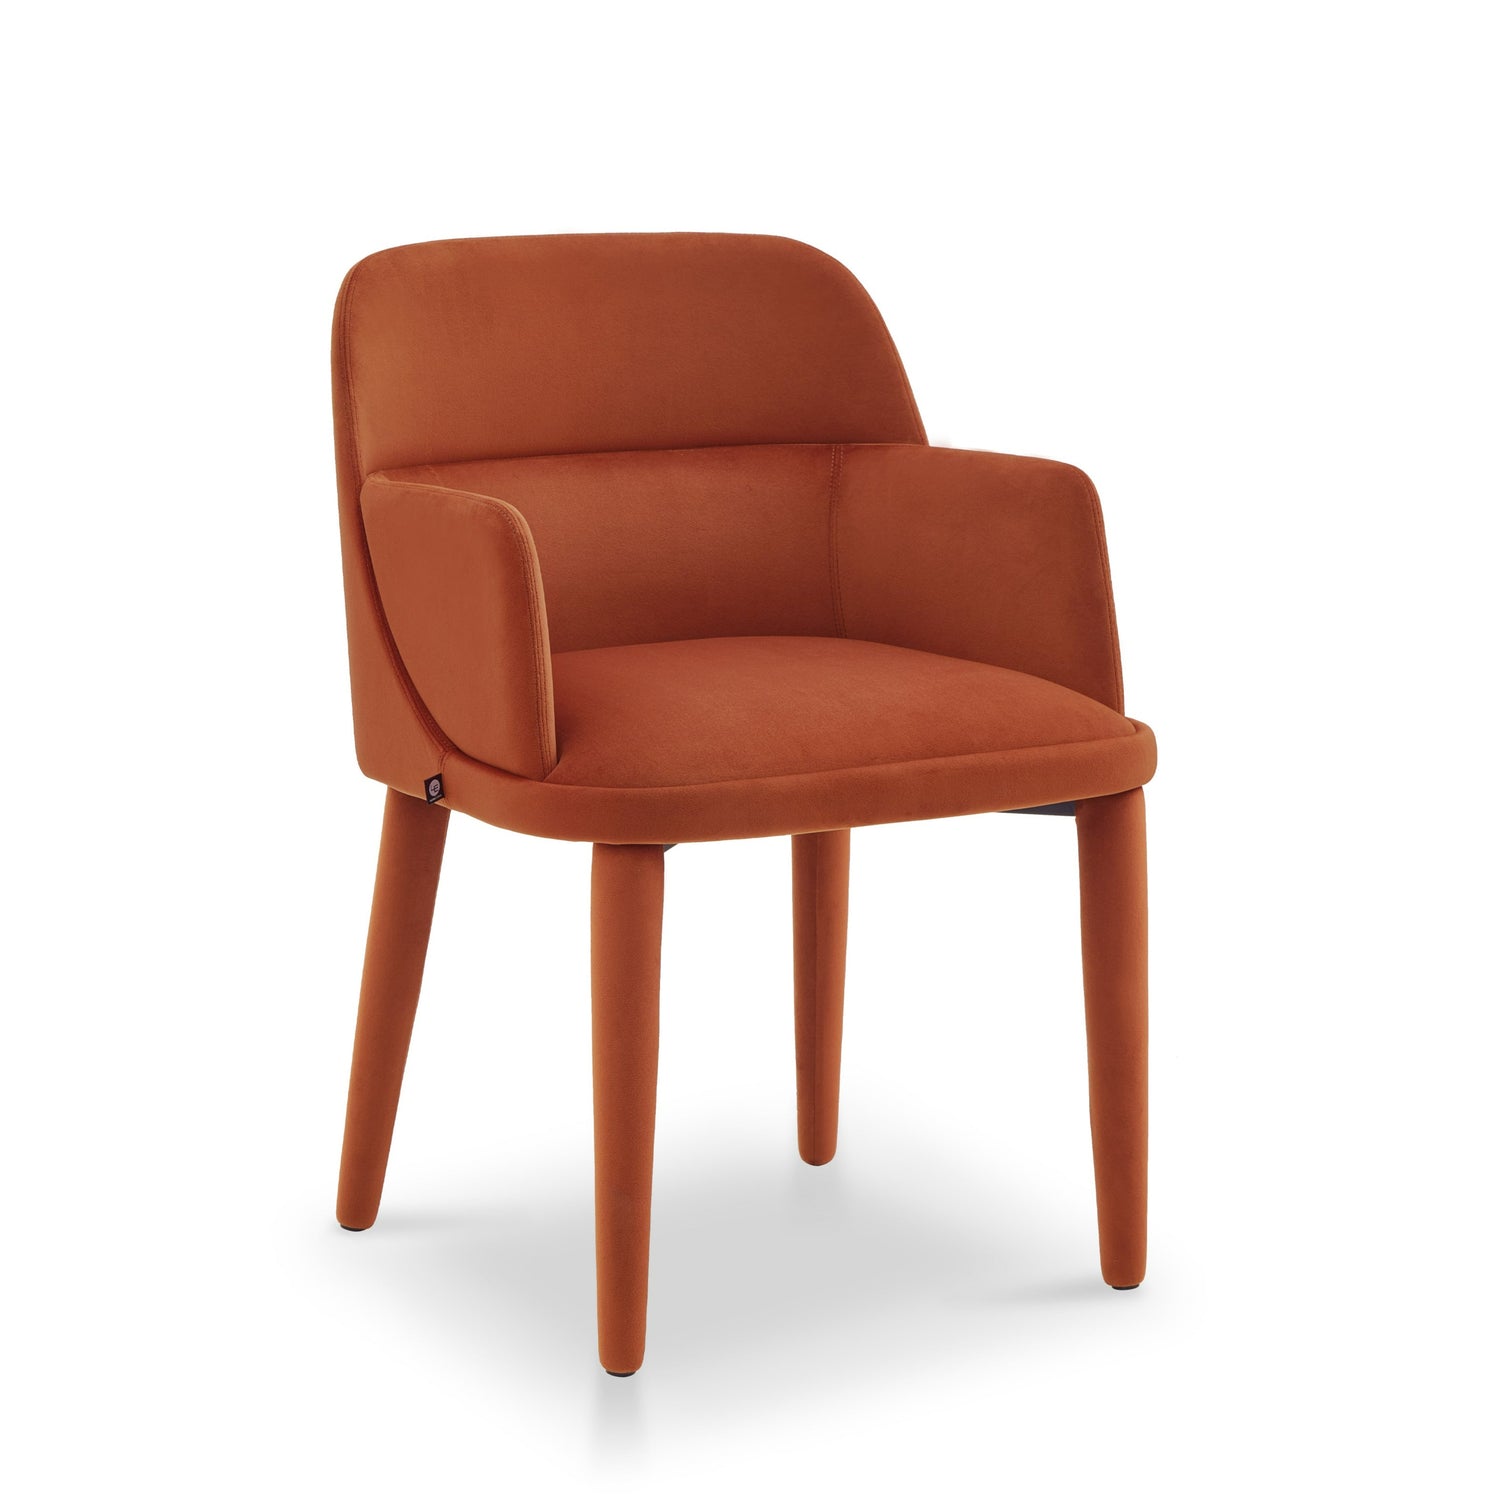  LiangAndEimil-Liang & Eimil Diva Dining Chair with Arms in Kaster Crimson Red-Orange 757 